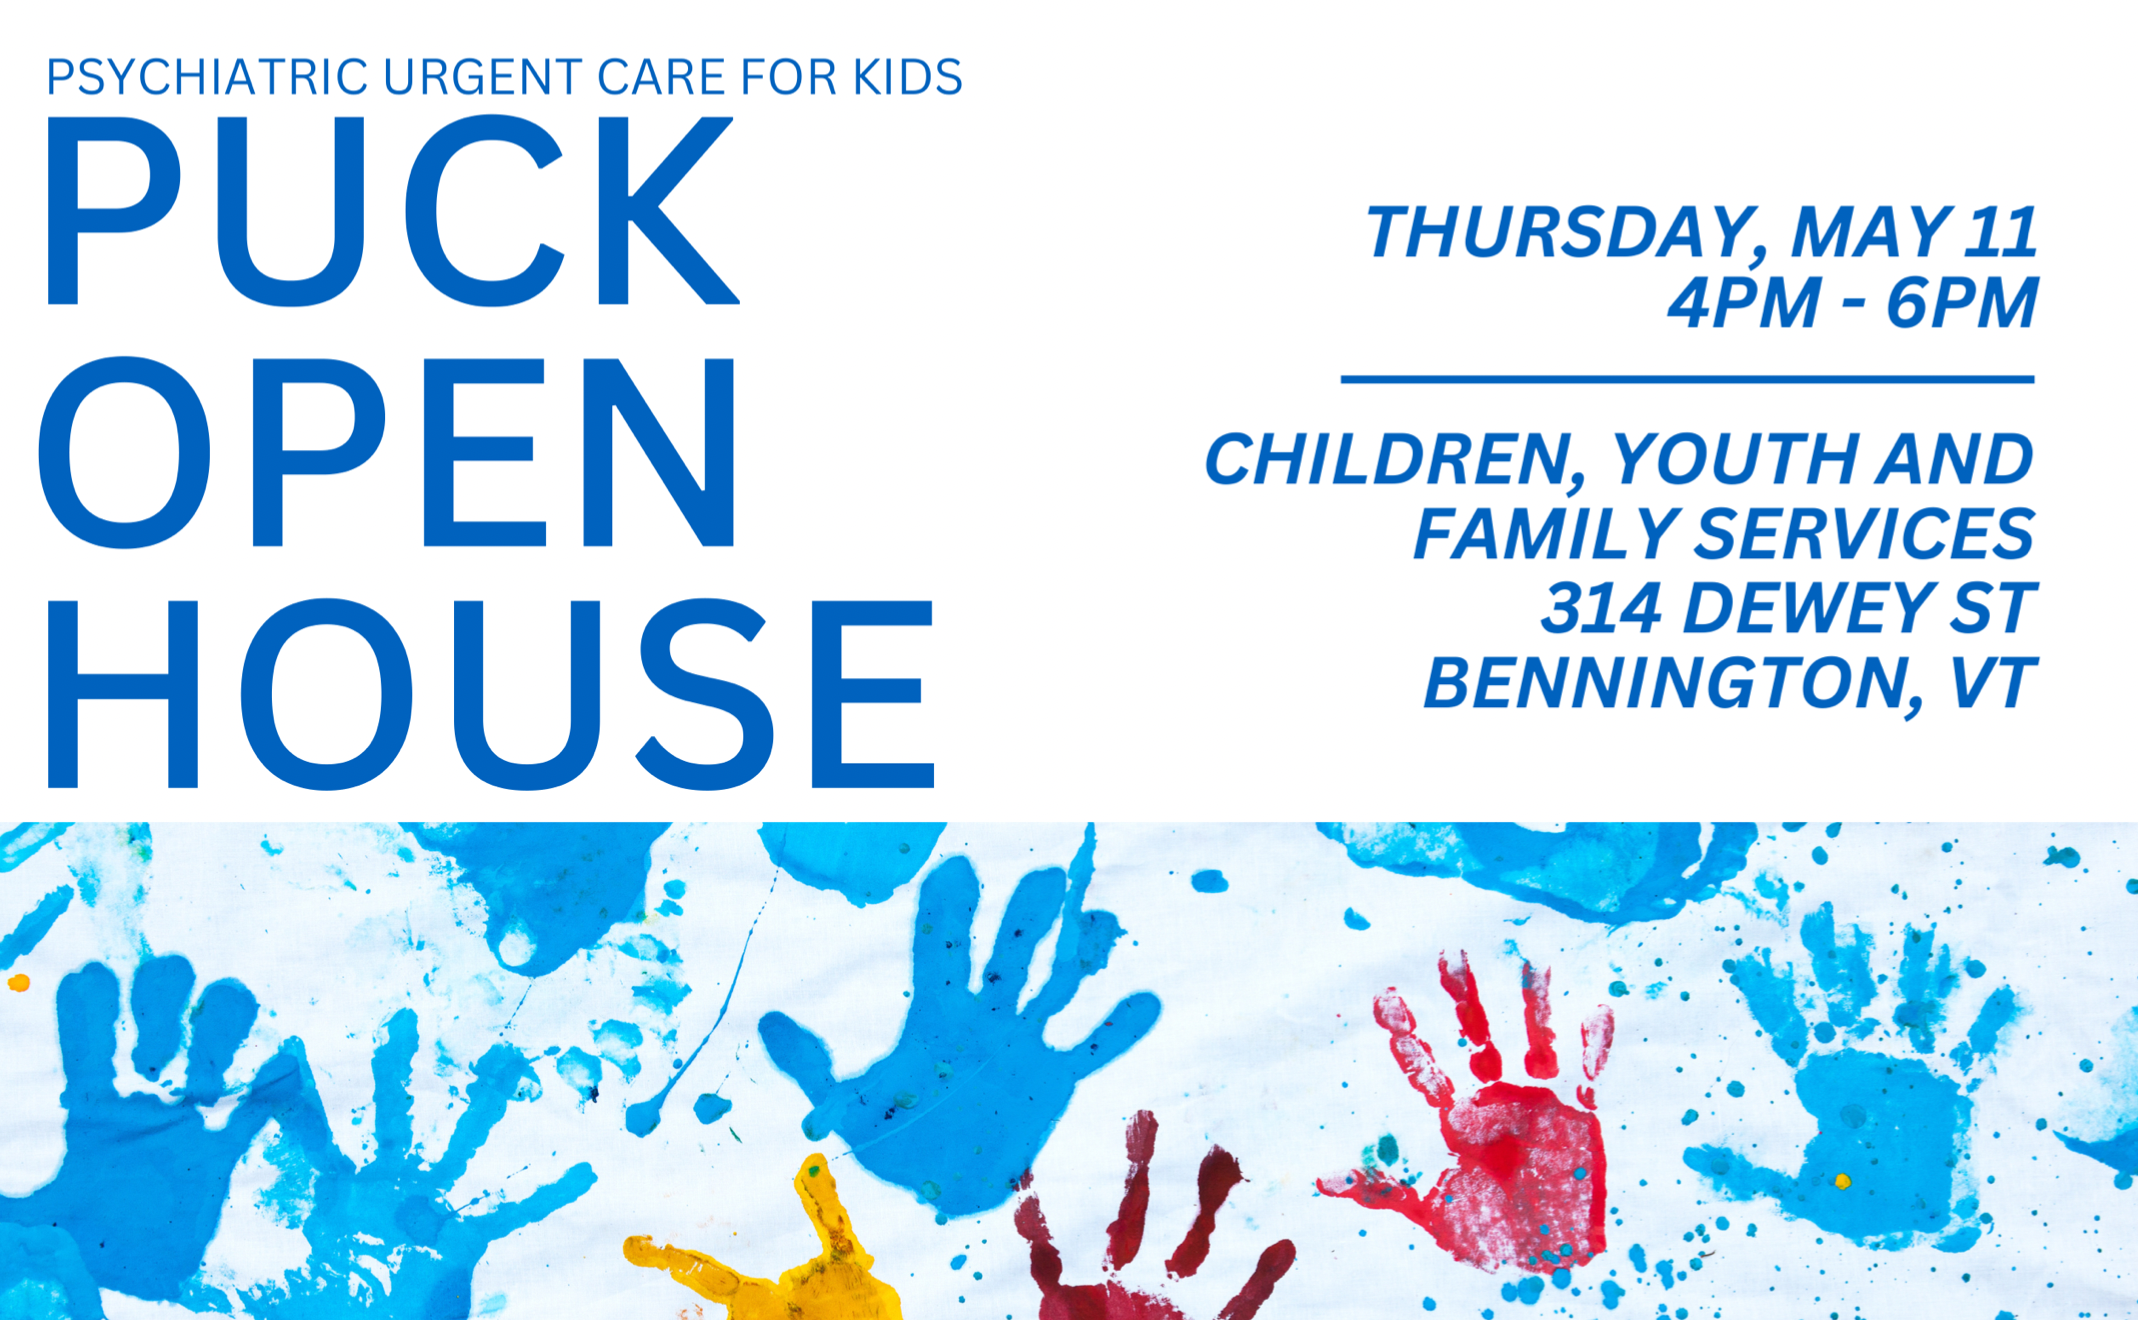 image with text that reads: PUCK open house Thursday May 11 4pm-6pm children, youth & family services 314 Dewey St. Bennington, VT. There is a graphic with multicolor paint handprints below the text.